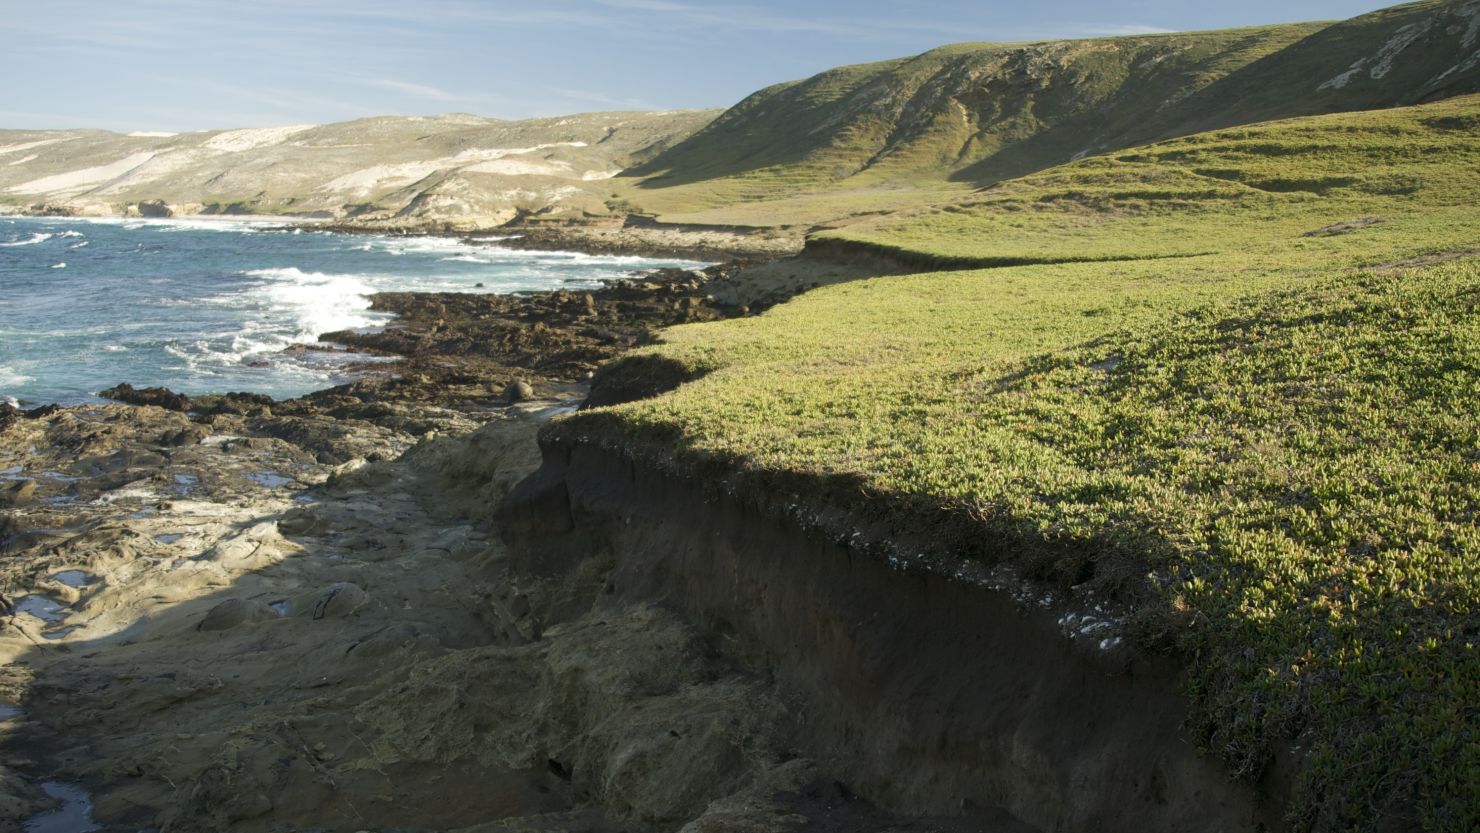 San Miguel Island, off the coast of Southern California, will reopen on May 17.